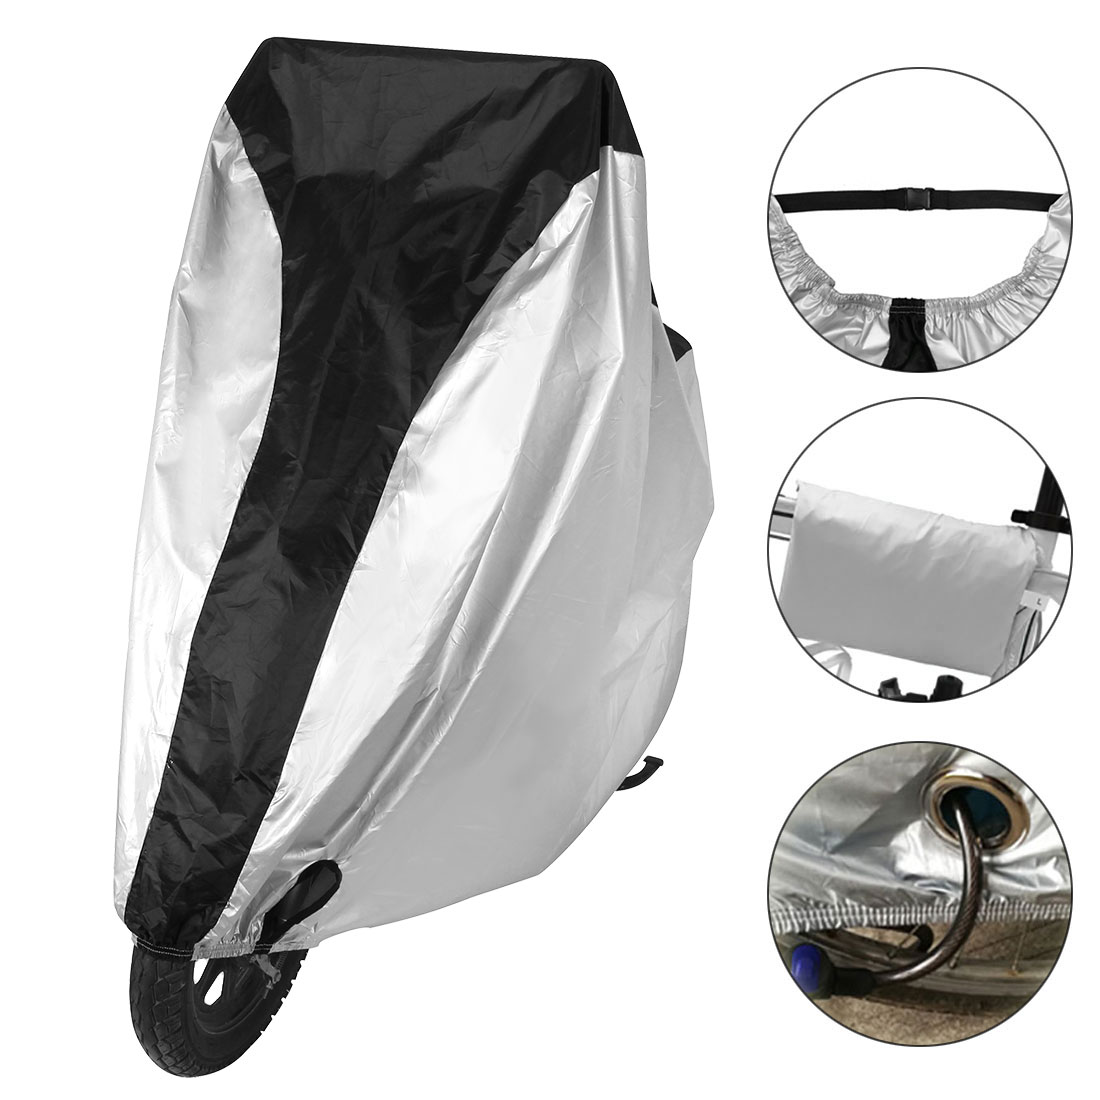 Unique Bargains 190T Wateproof Bicycle Bike Cover Dust/Rain/Sun Protector for Outdoor Travel Storage Cover